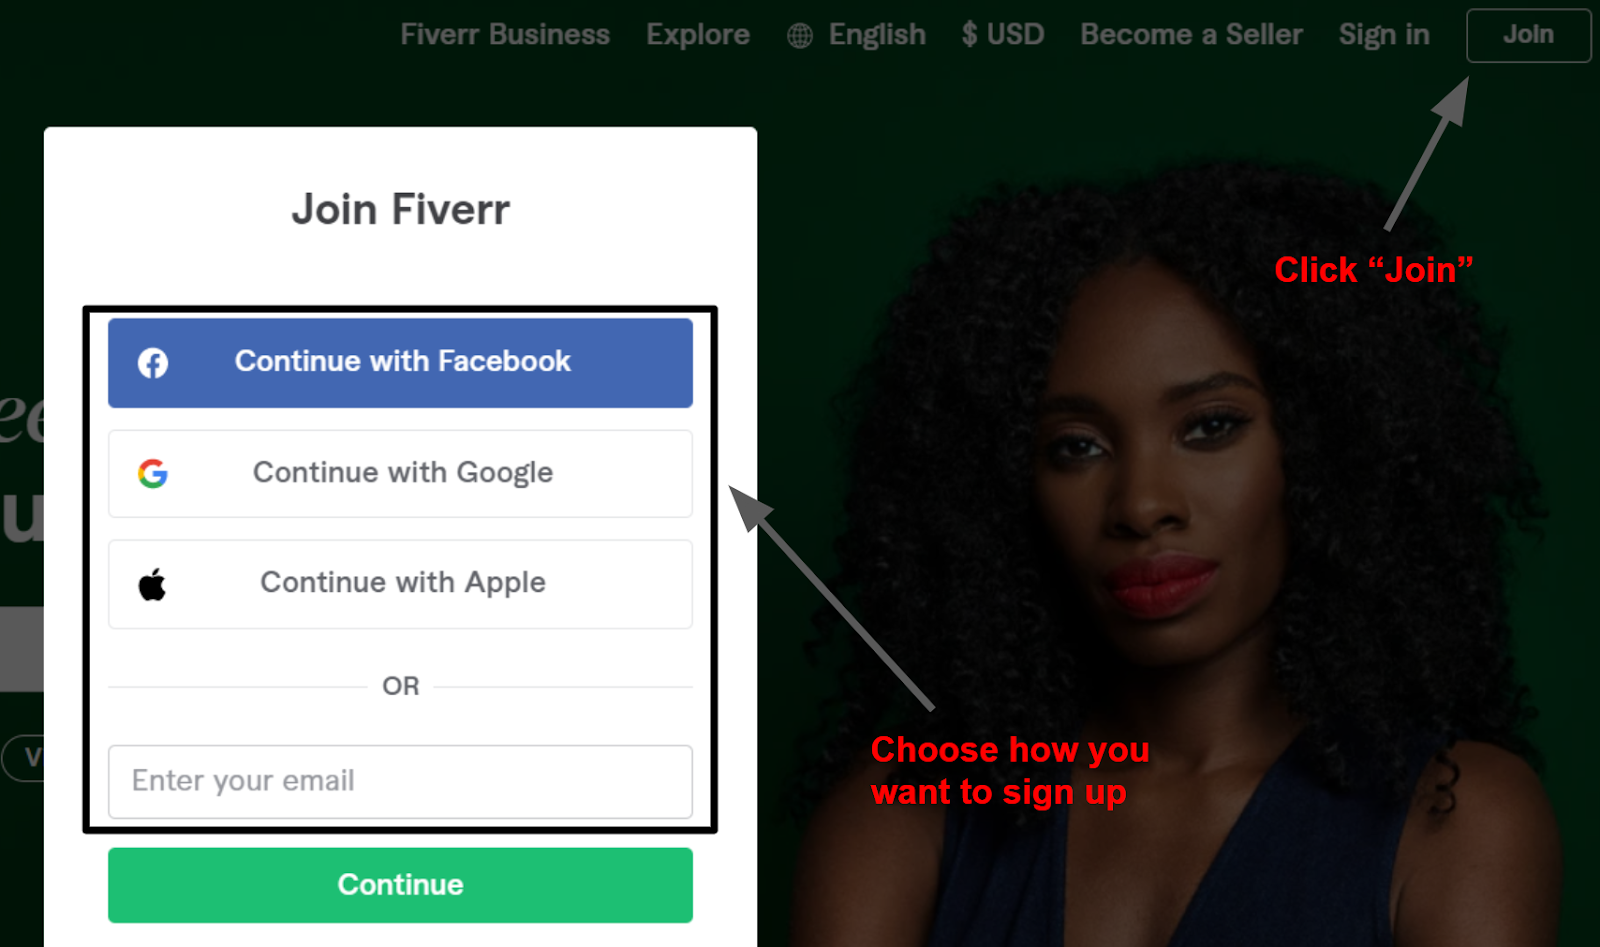 creating an account on Fiverr